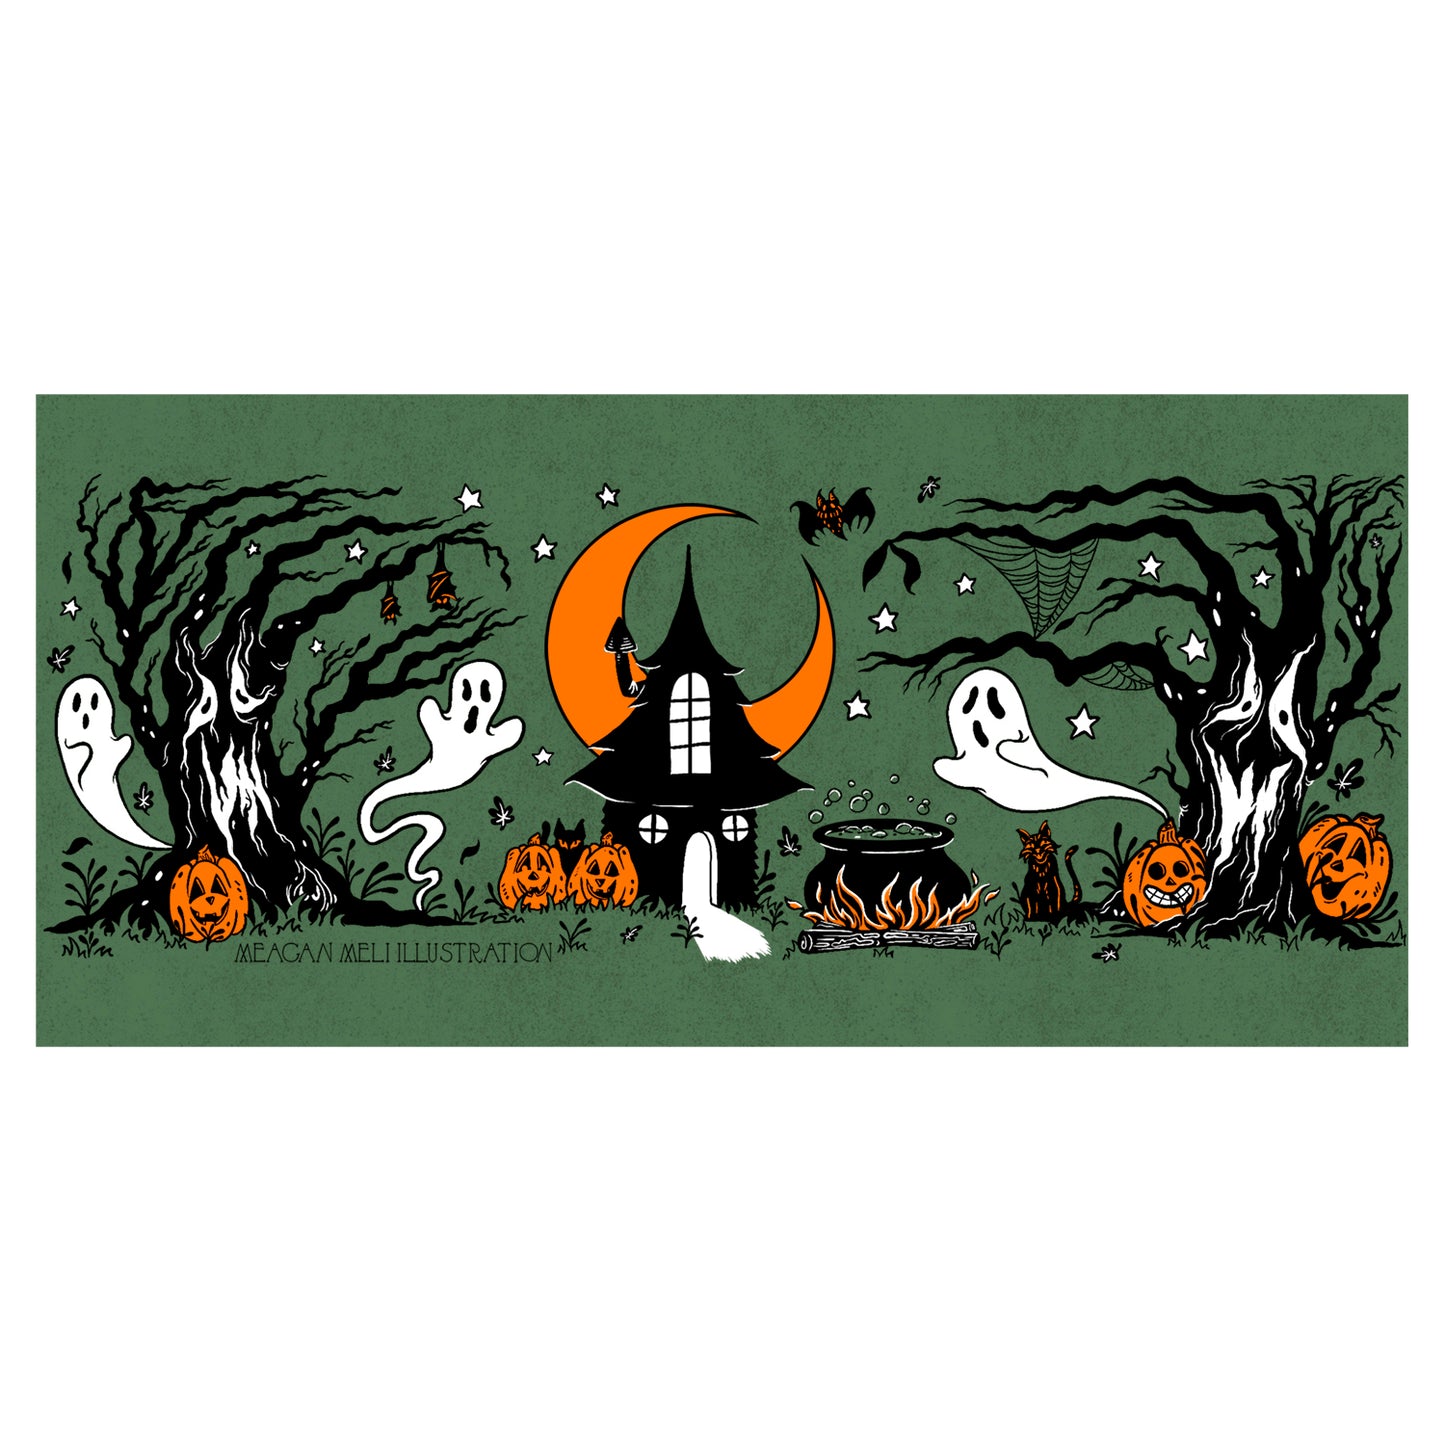 Hallowe'en At The Witches Forest Giclee Print